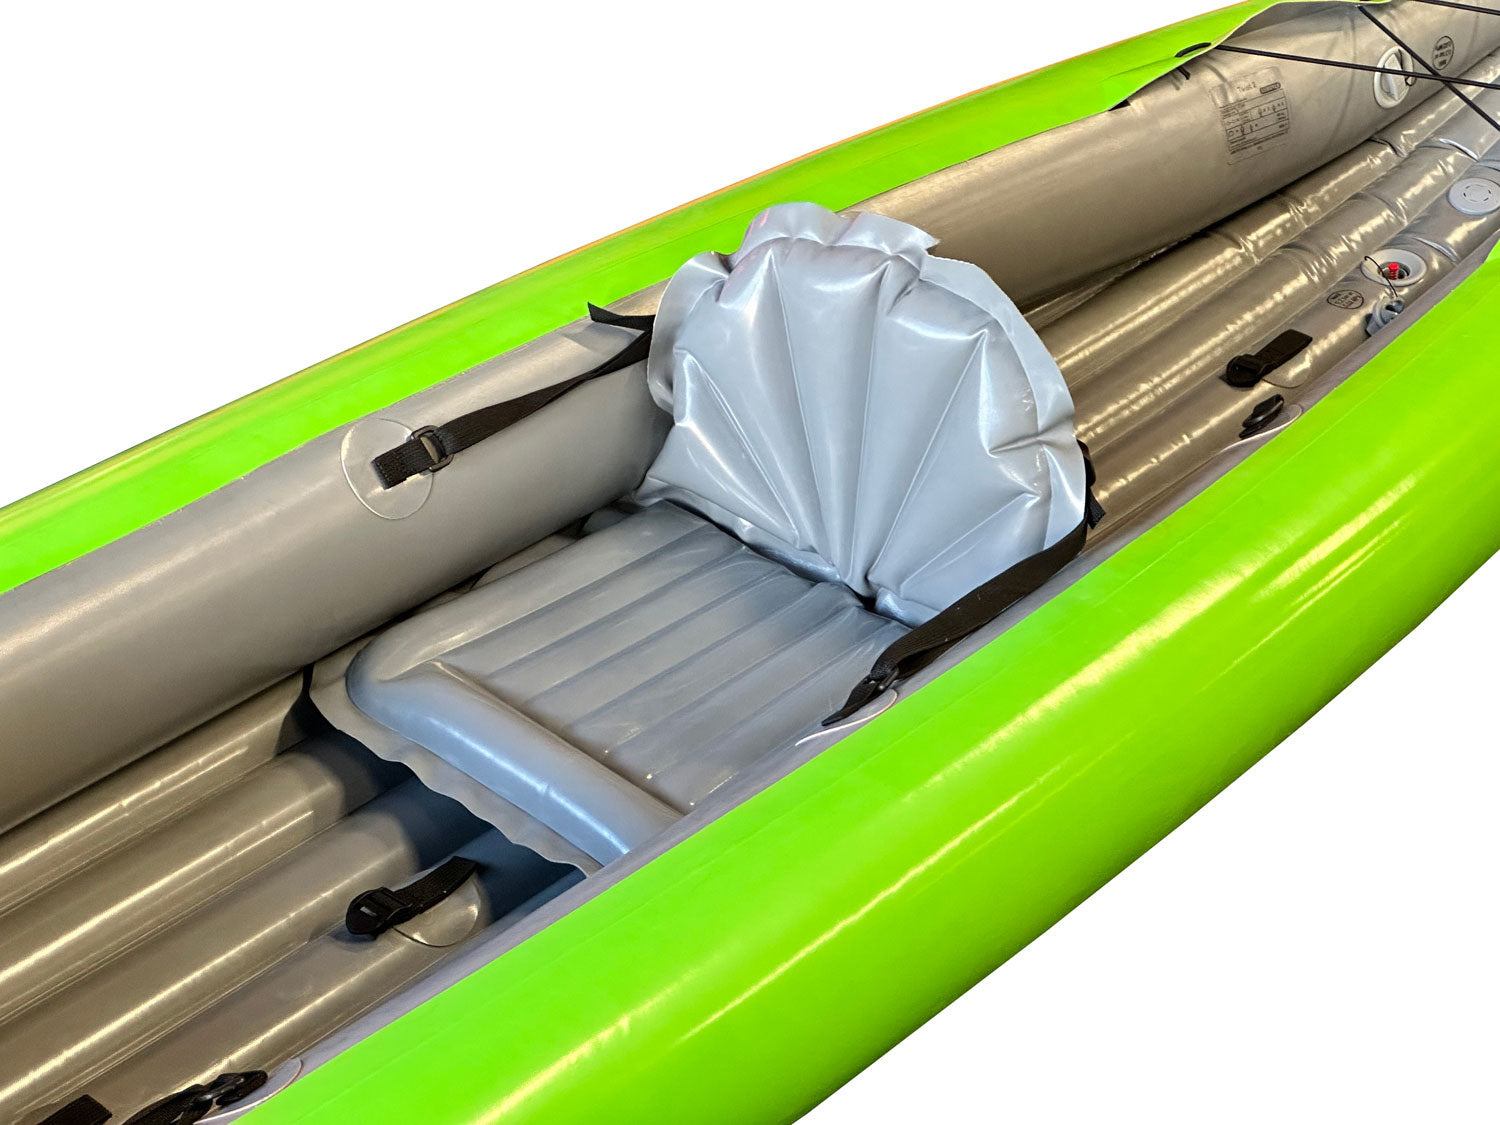 Accessories For Inflatable Kayaks & Canoes